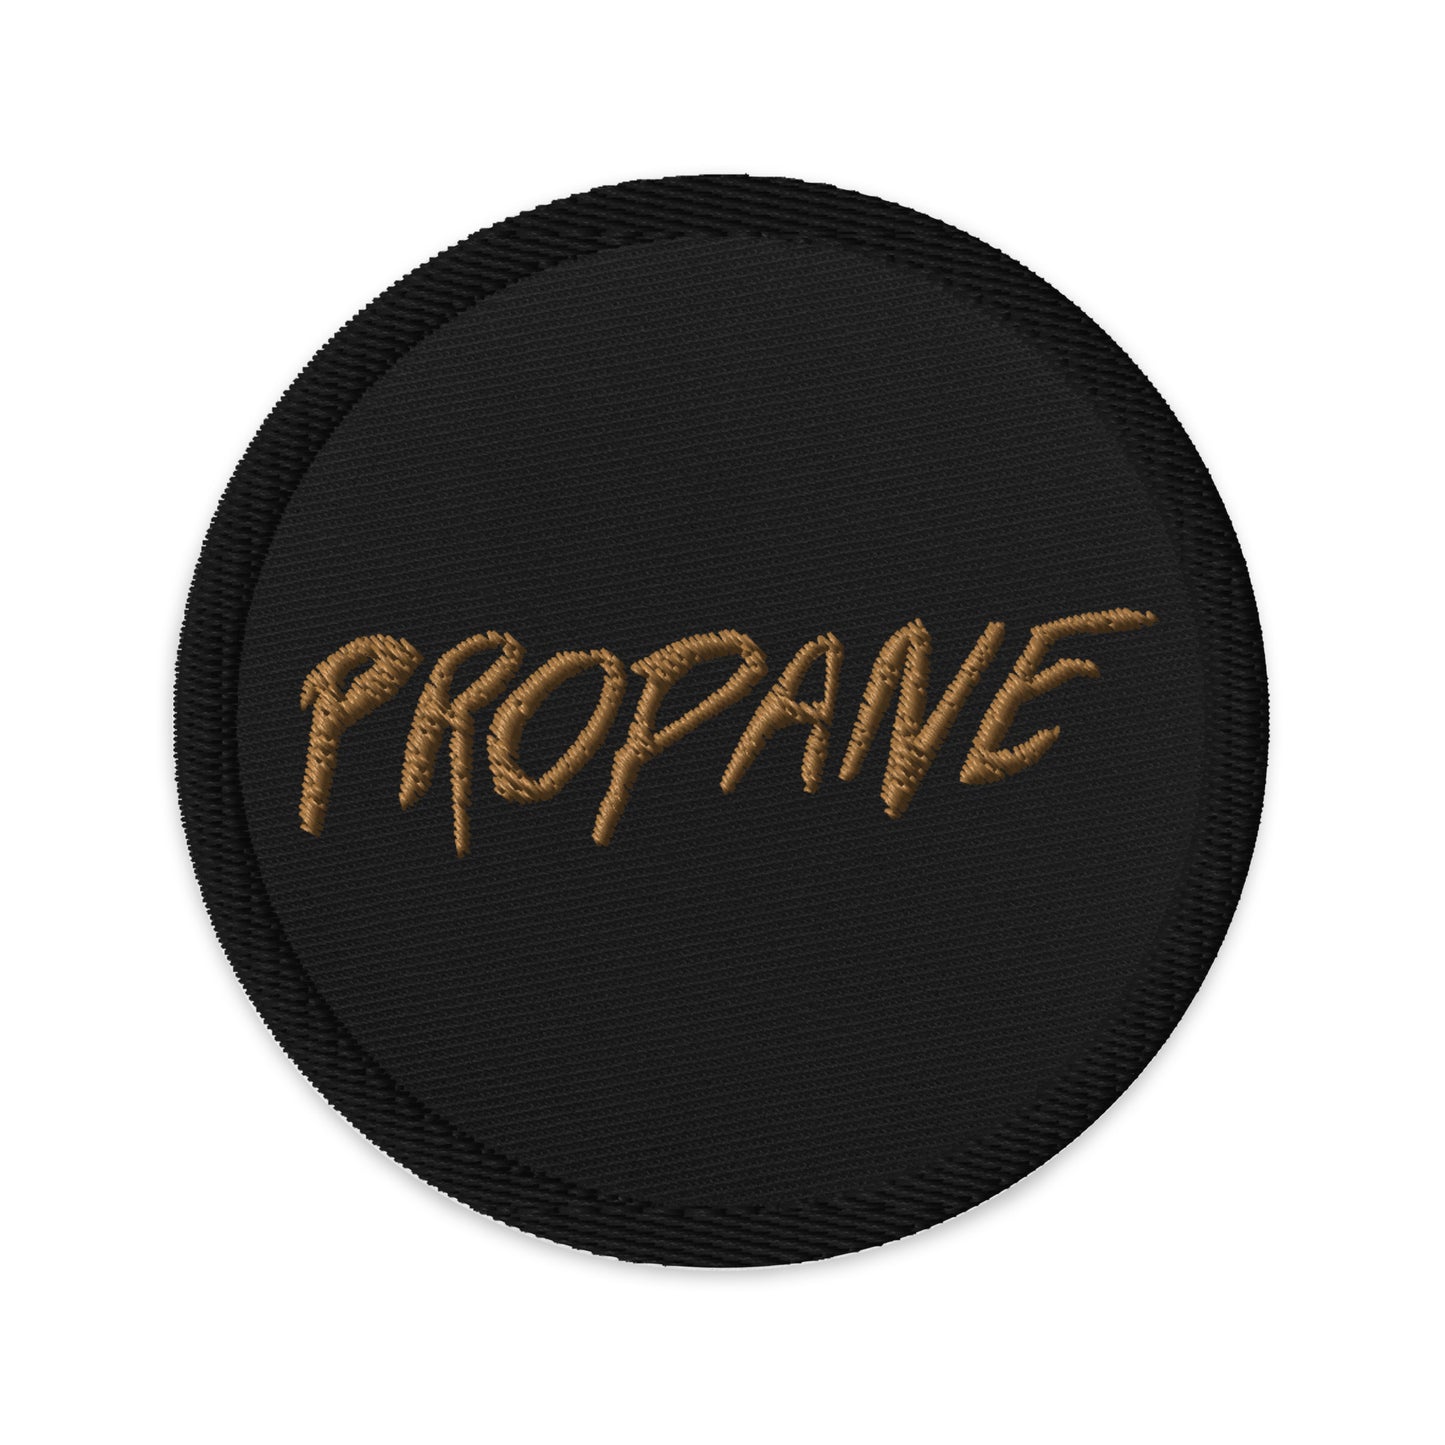 Propane Logo - Embroidered patches